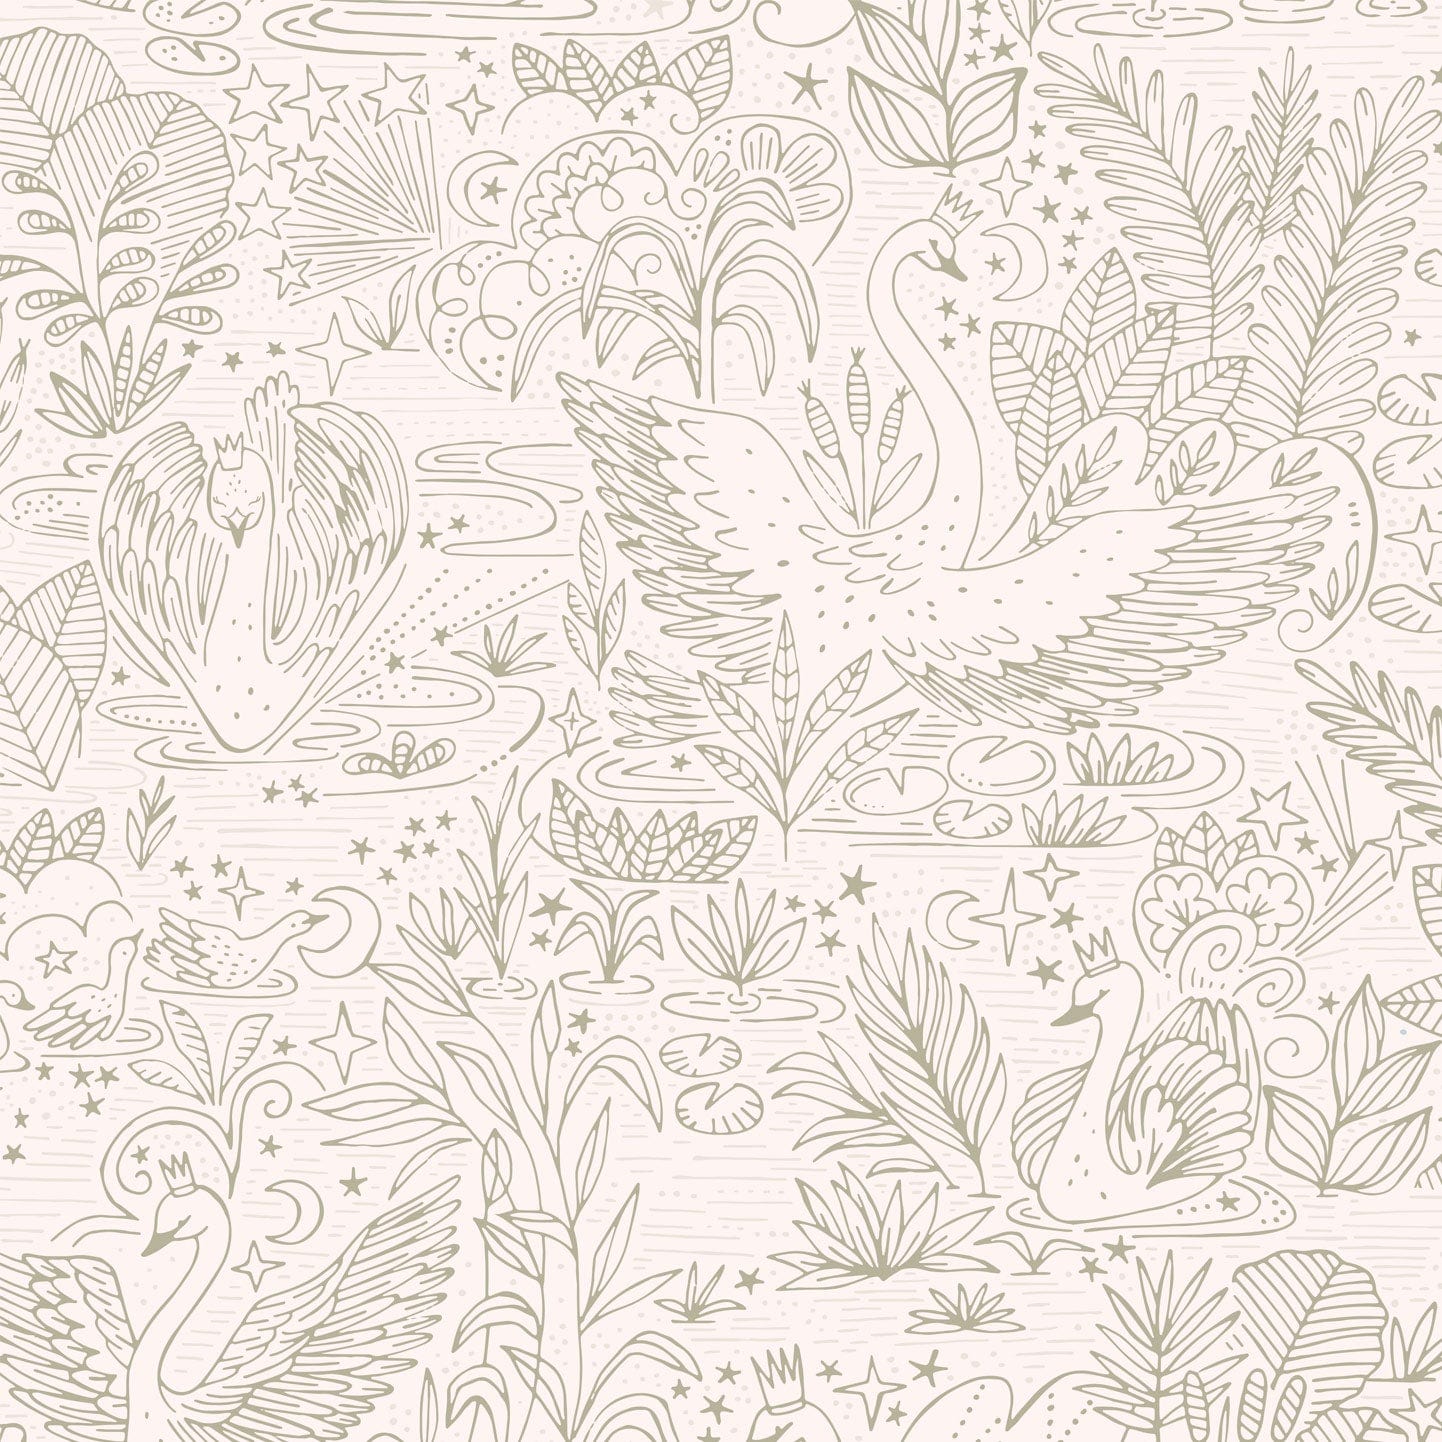 Wallpaper sample of very detailed floral print with swans gliding across a lake, flowers and leaves surround them. The print is line work and is all in sage green